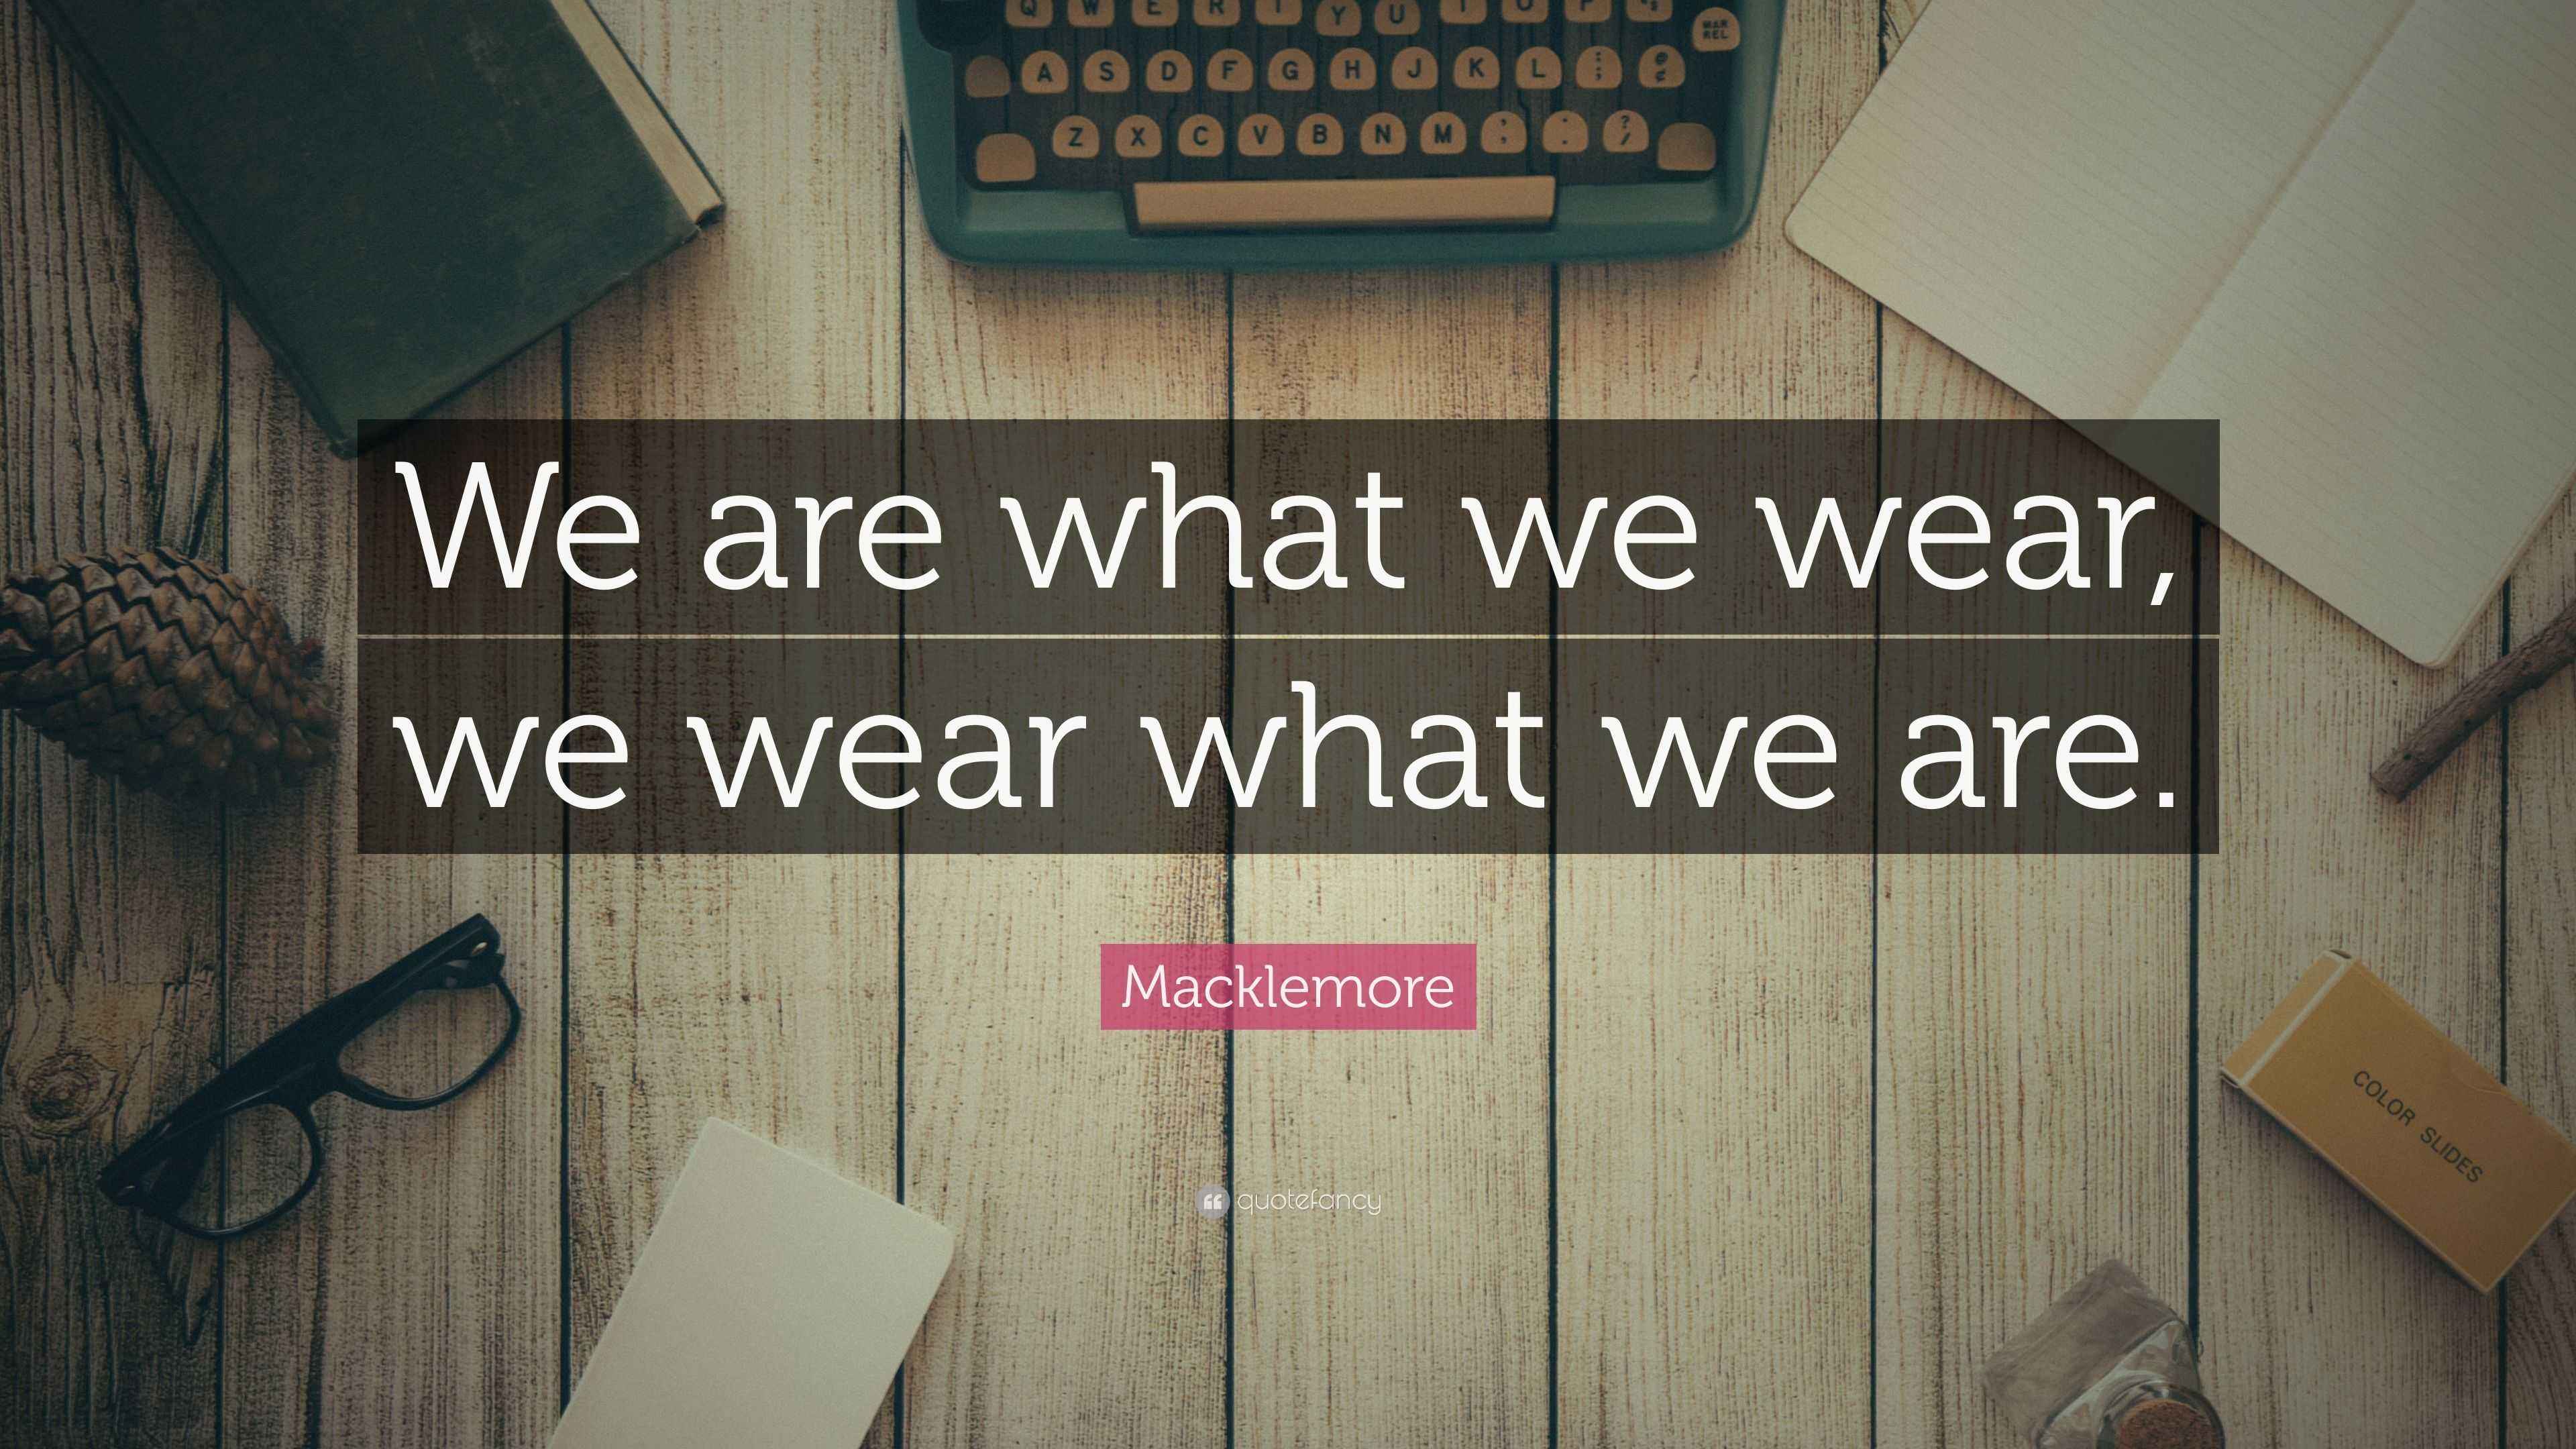 we are what we wear essay